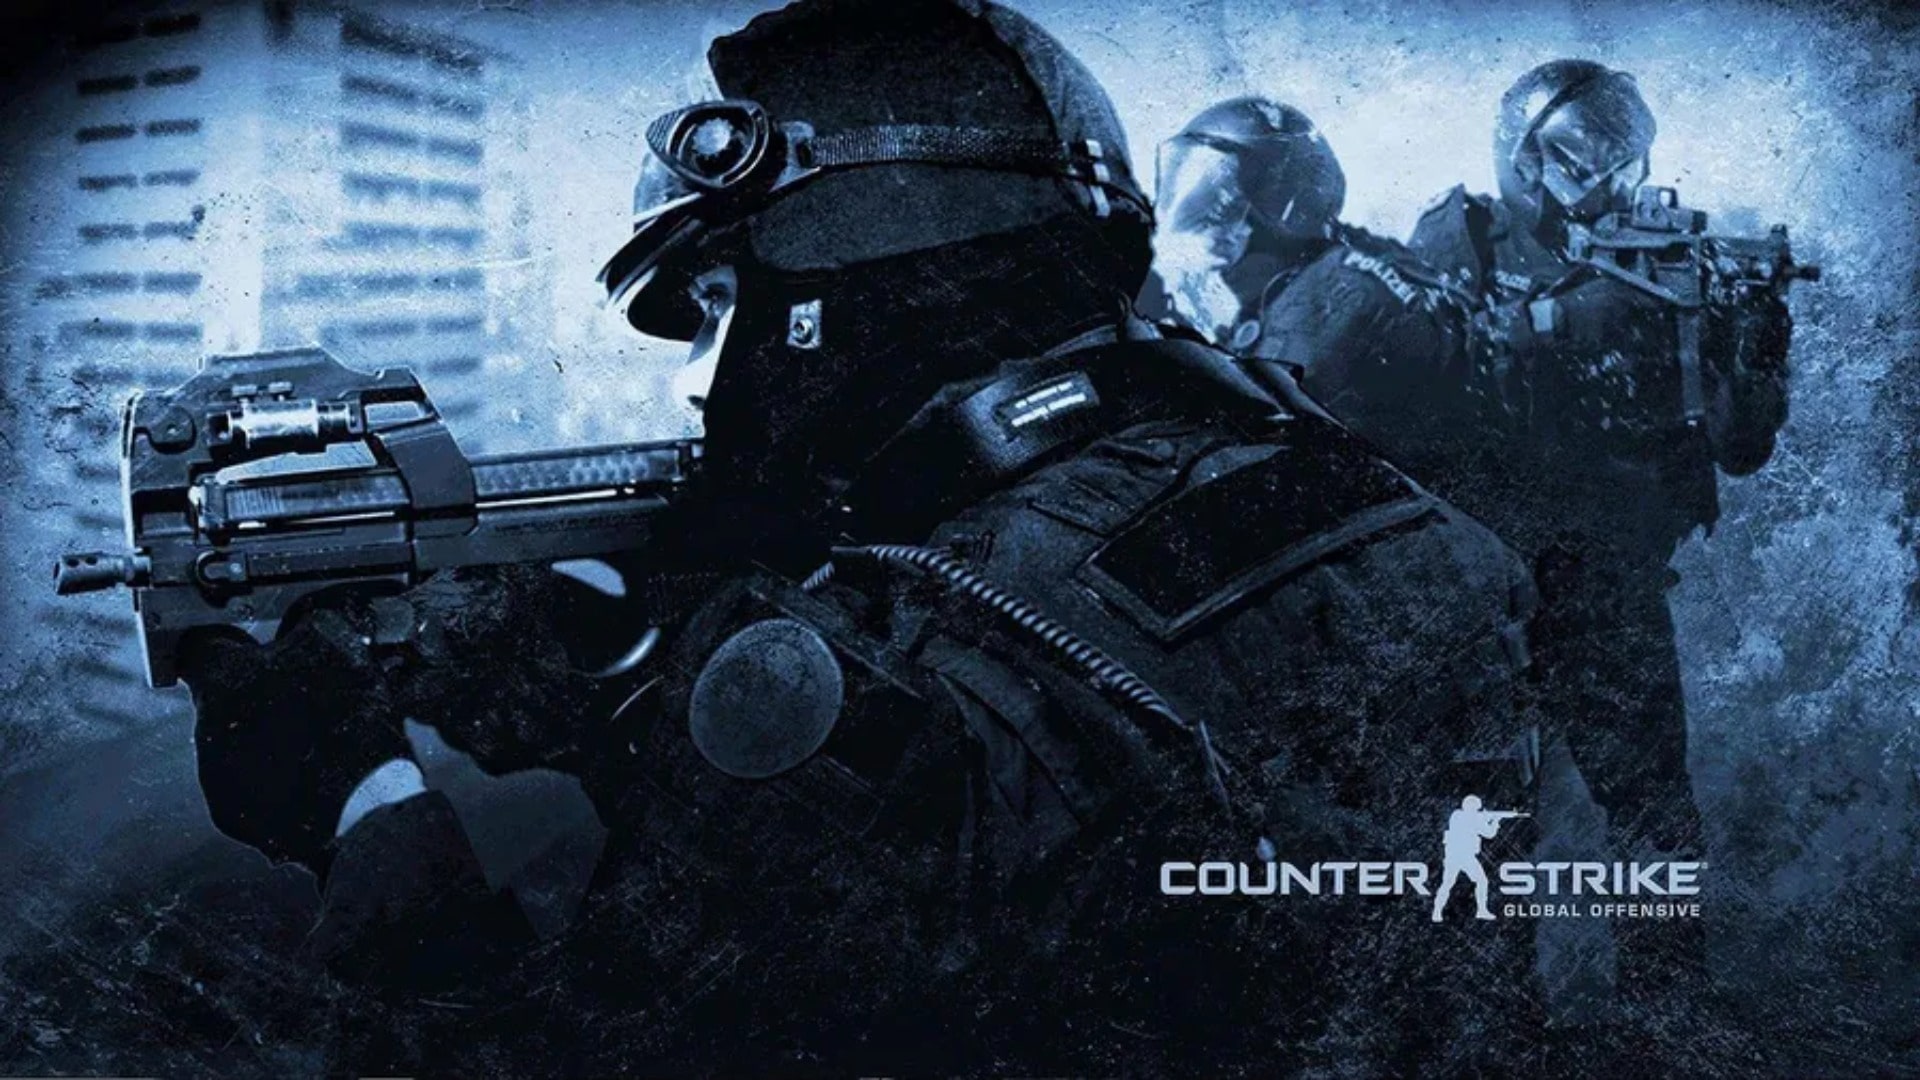 In-game screenshot of Counter-Strike: Global Offensive displaying a tactical shooter scenario